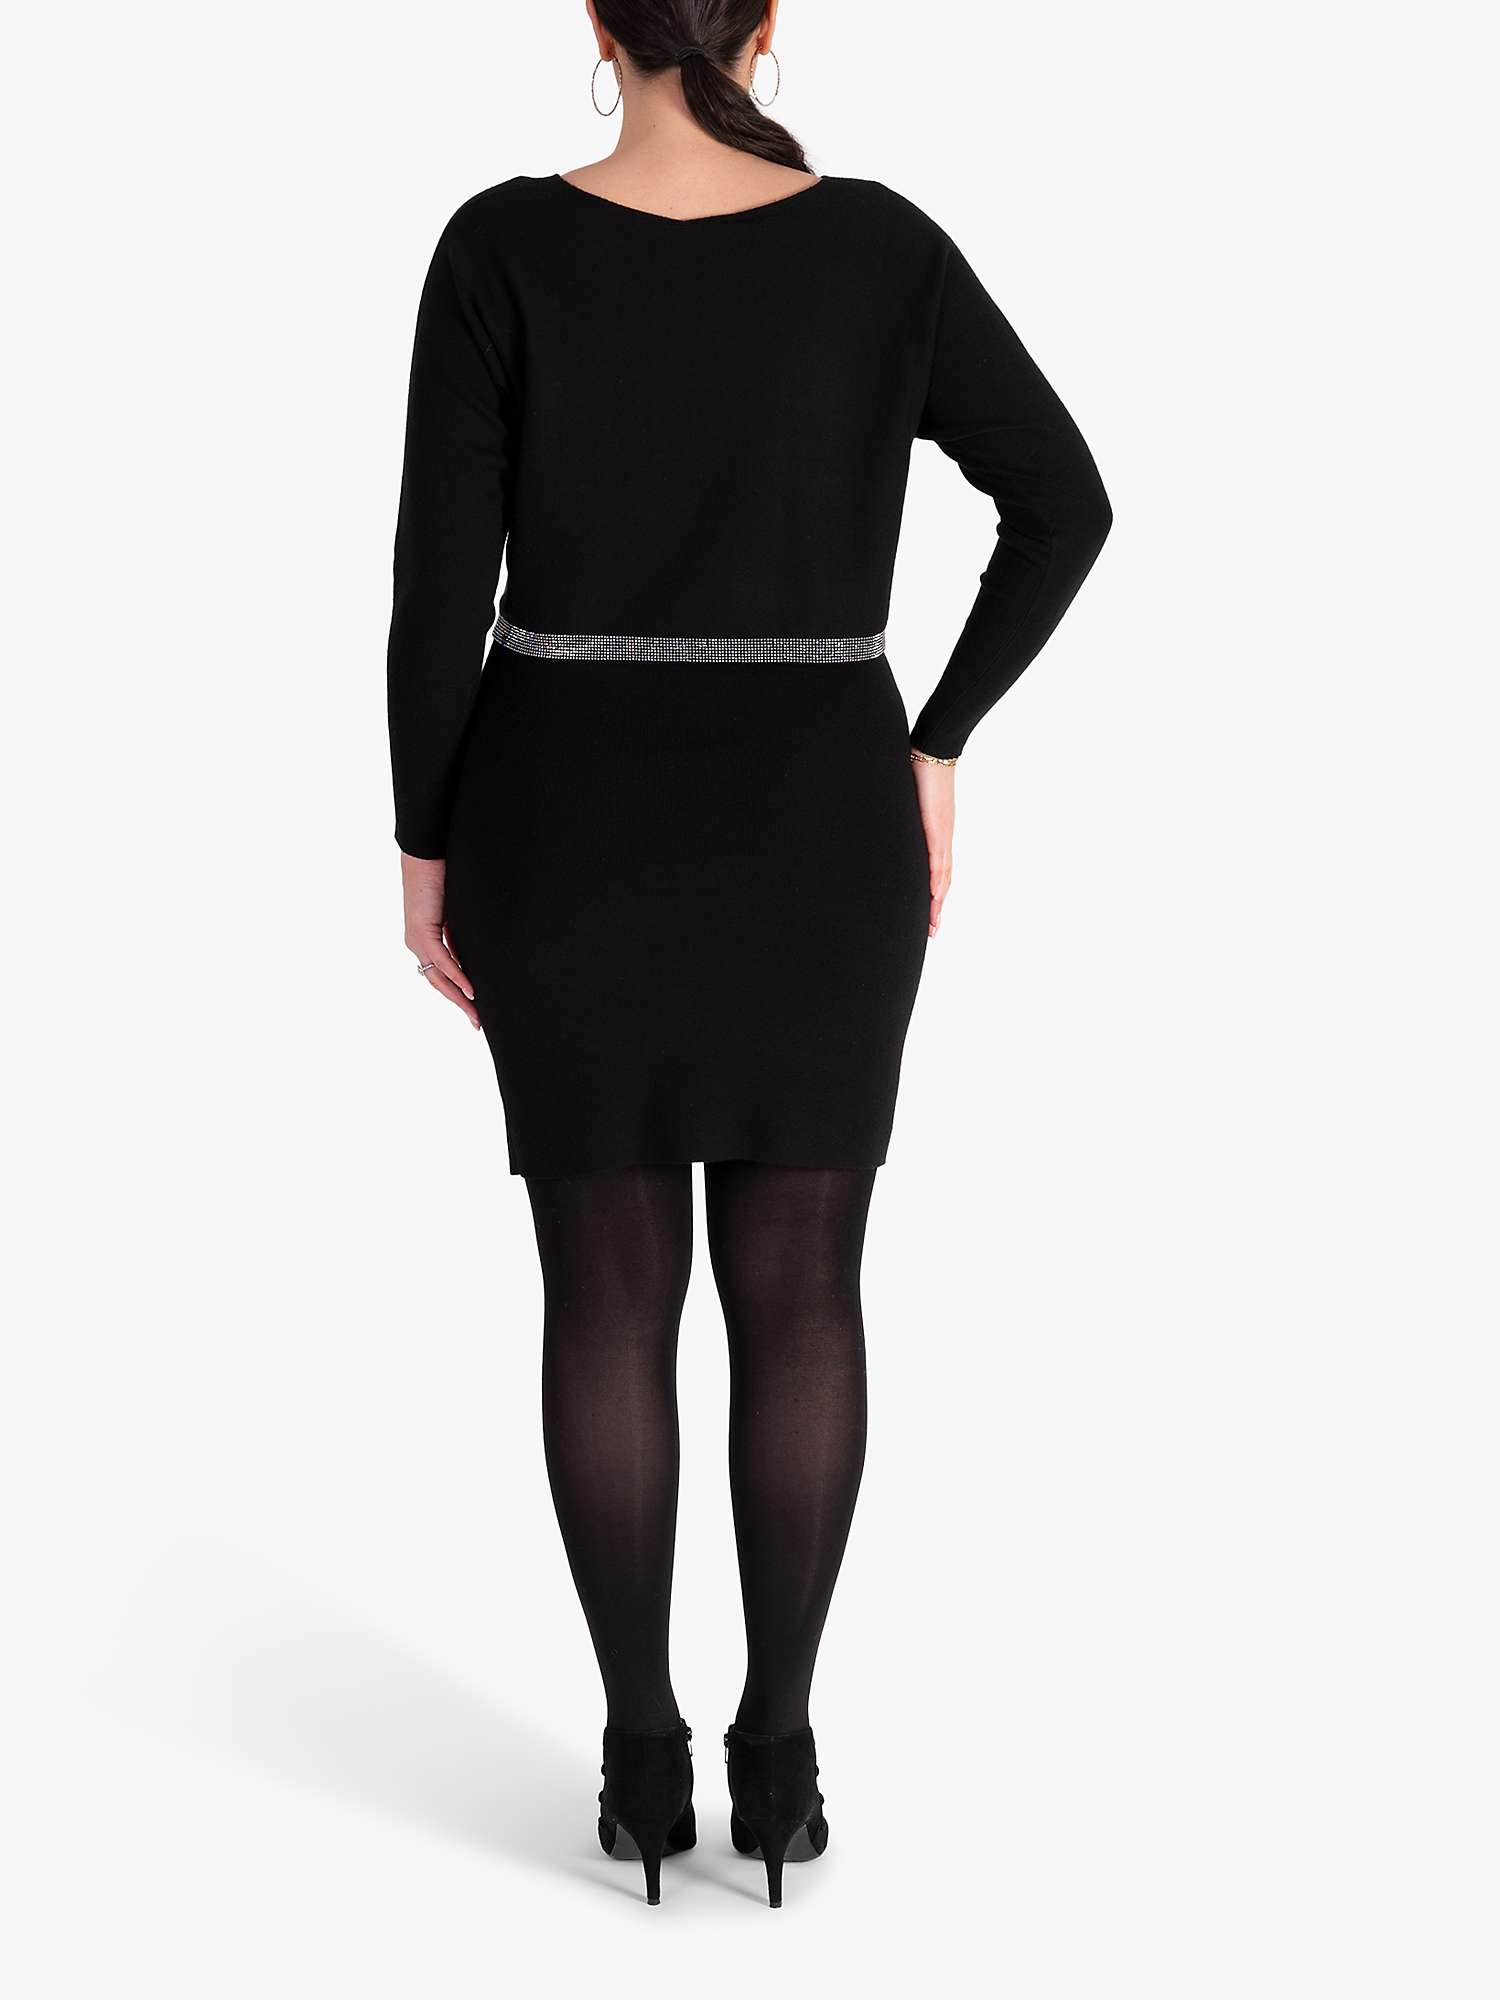 Buy chesca Diamante Waist Knitted Dress, Black Online at johnlewis.com